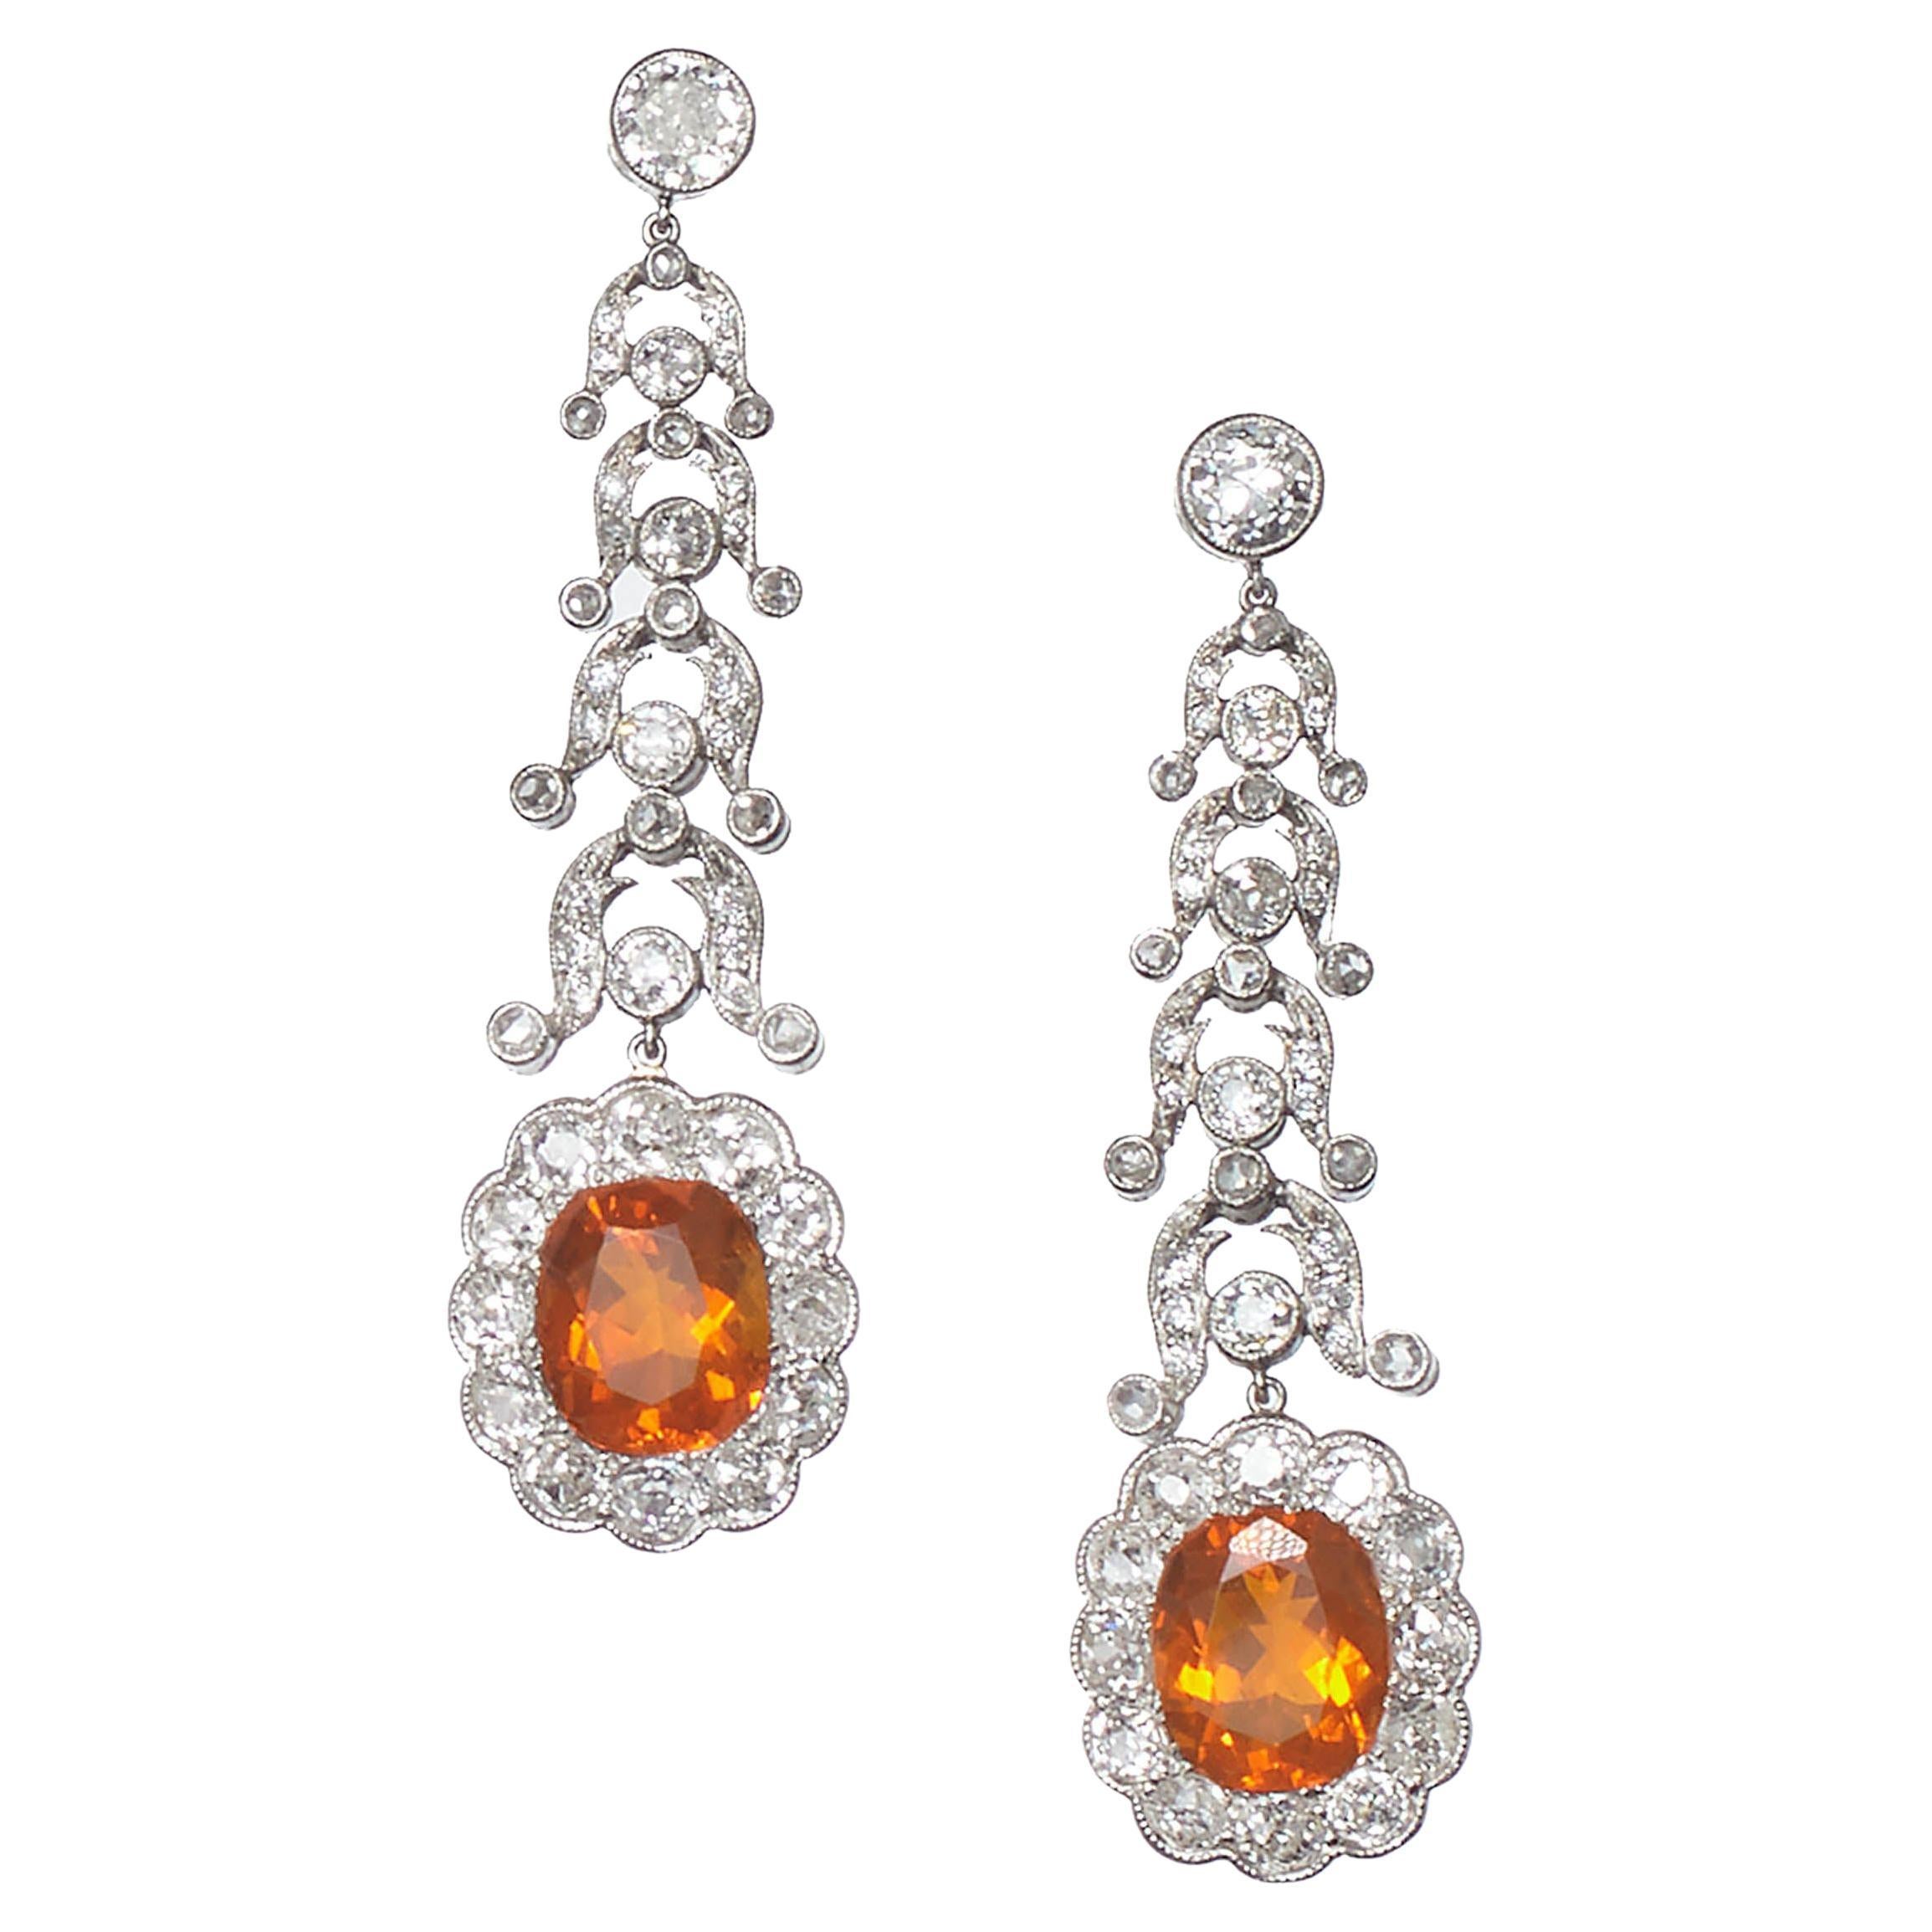 Garrards Fire Opal Diamond and Platinum Drop Earrings and Negligee Pendant Set For Sale